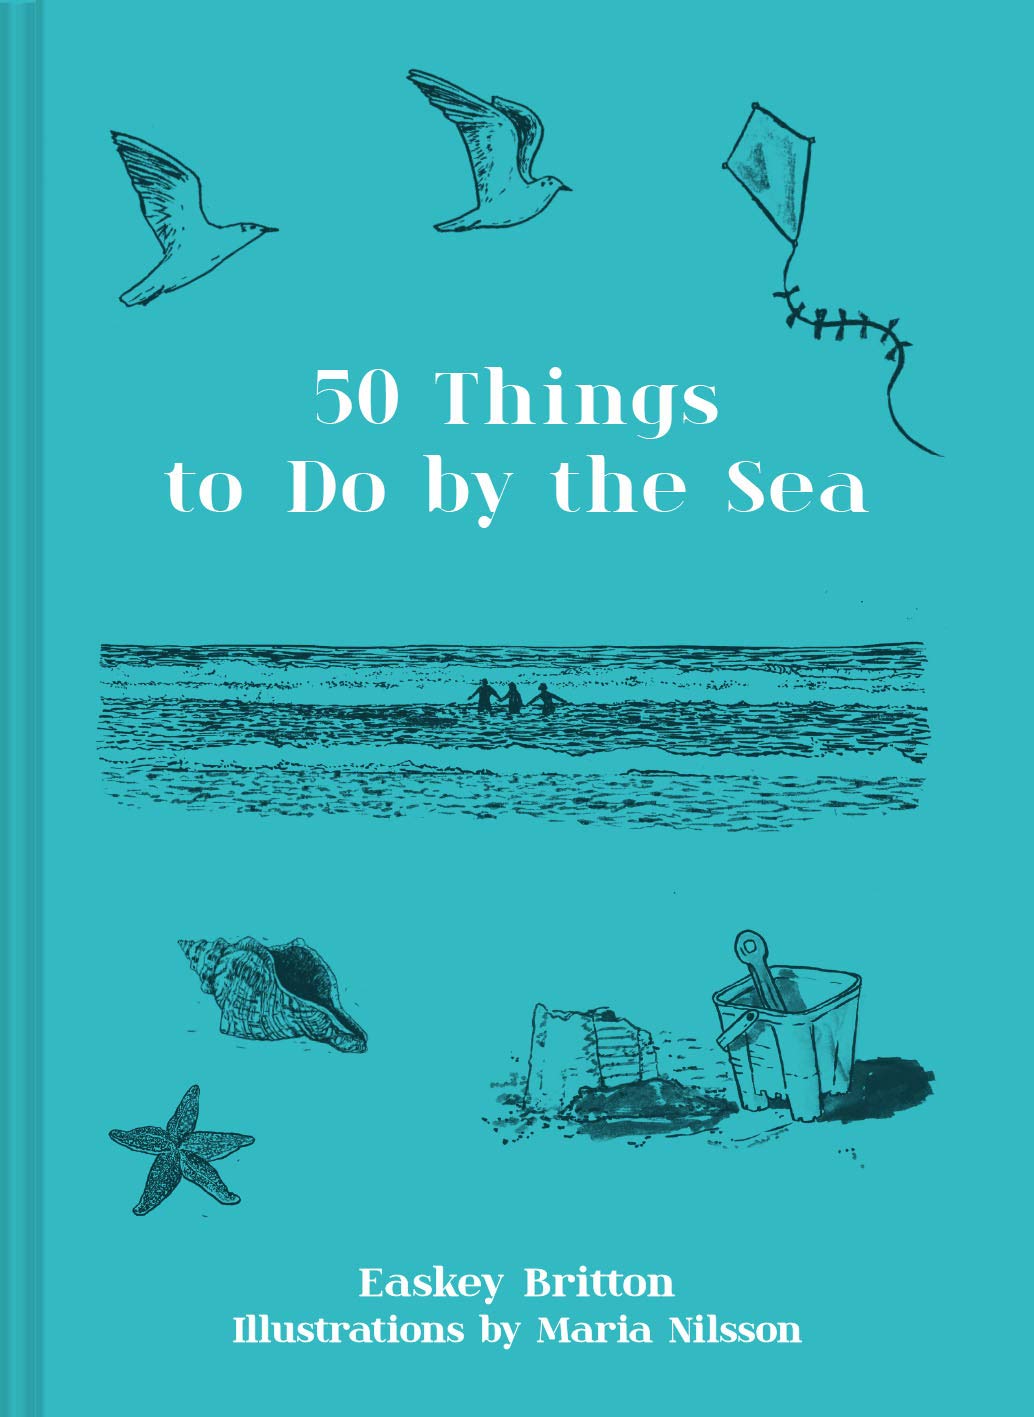 50 Things to do by the Sea by Easkey Britton & Maria Nilsson